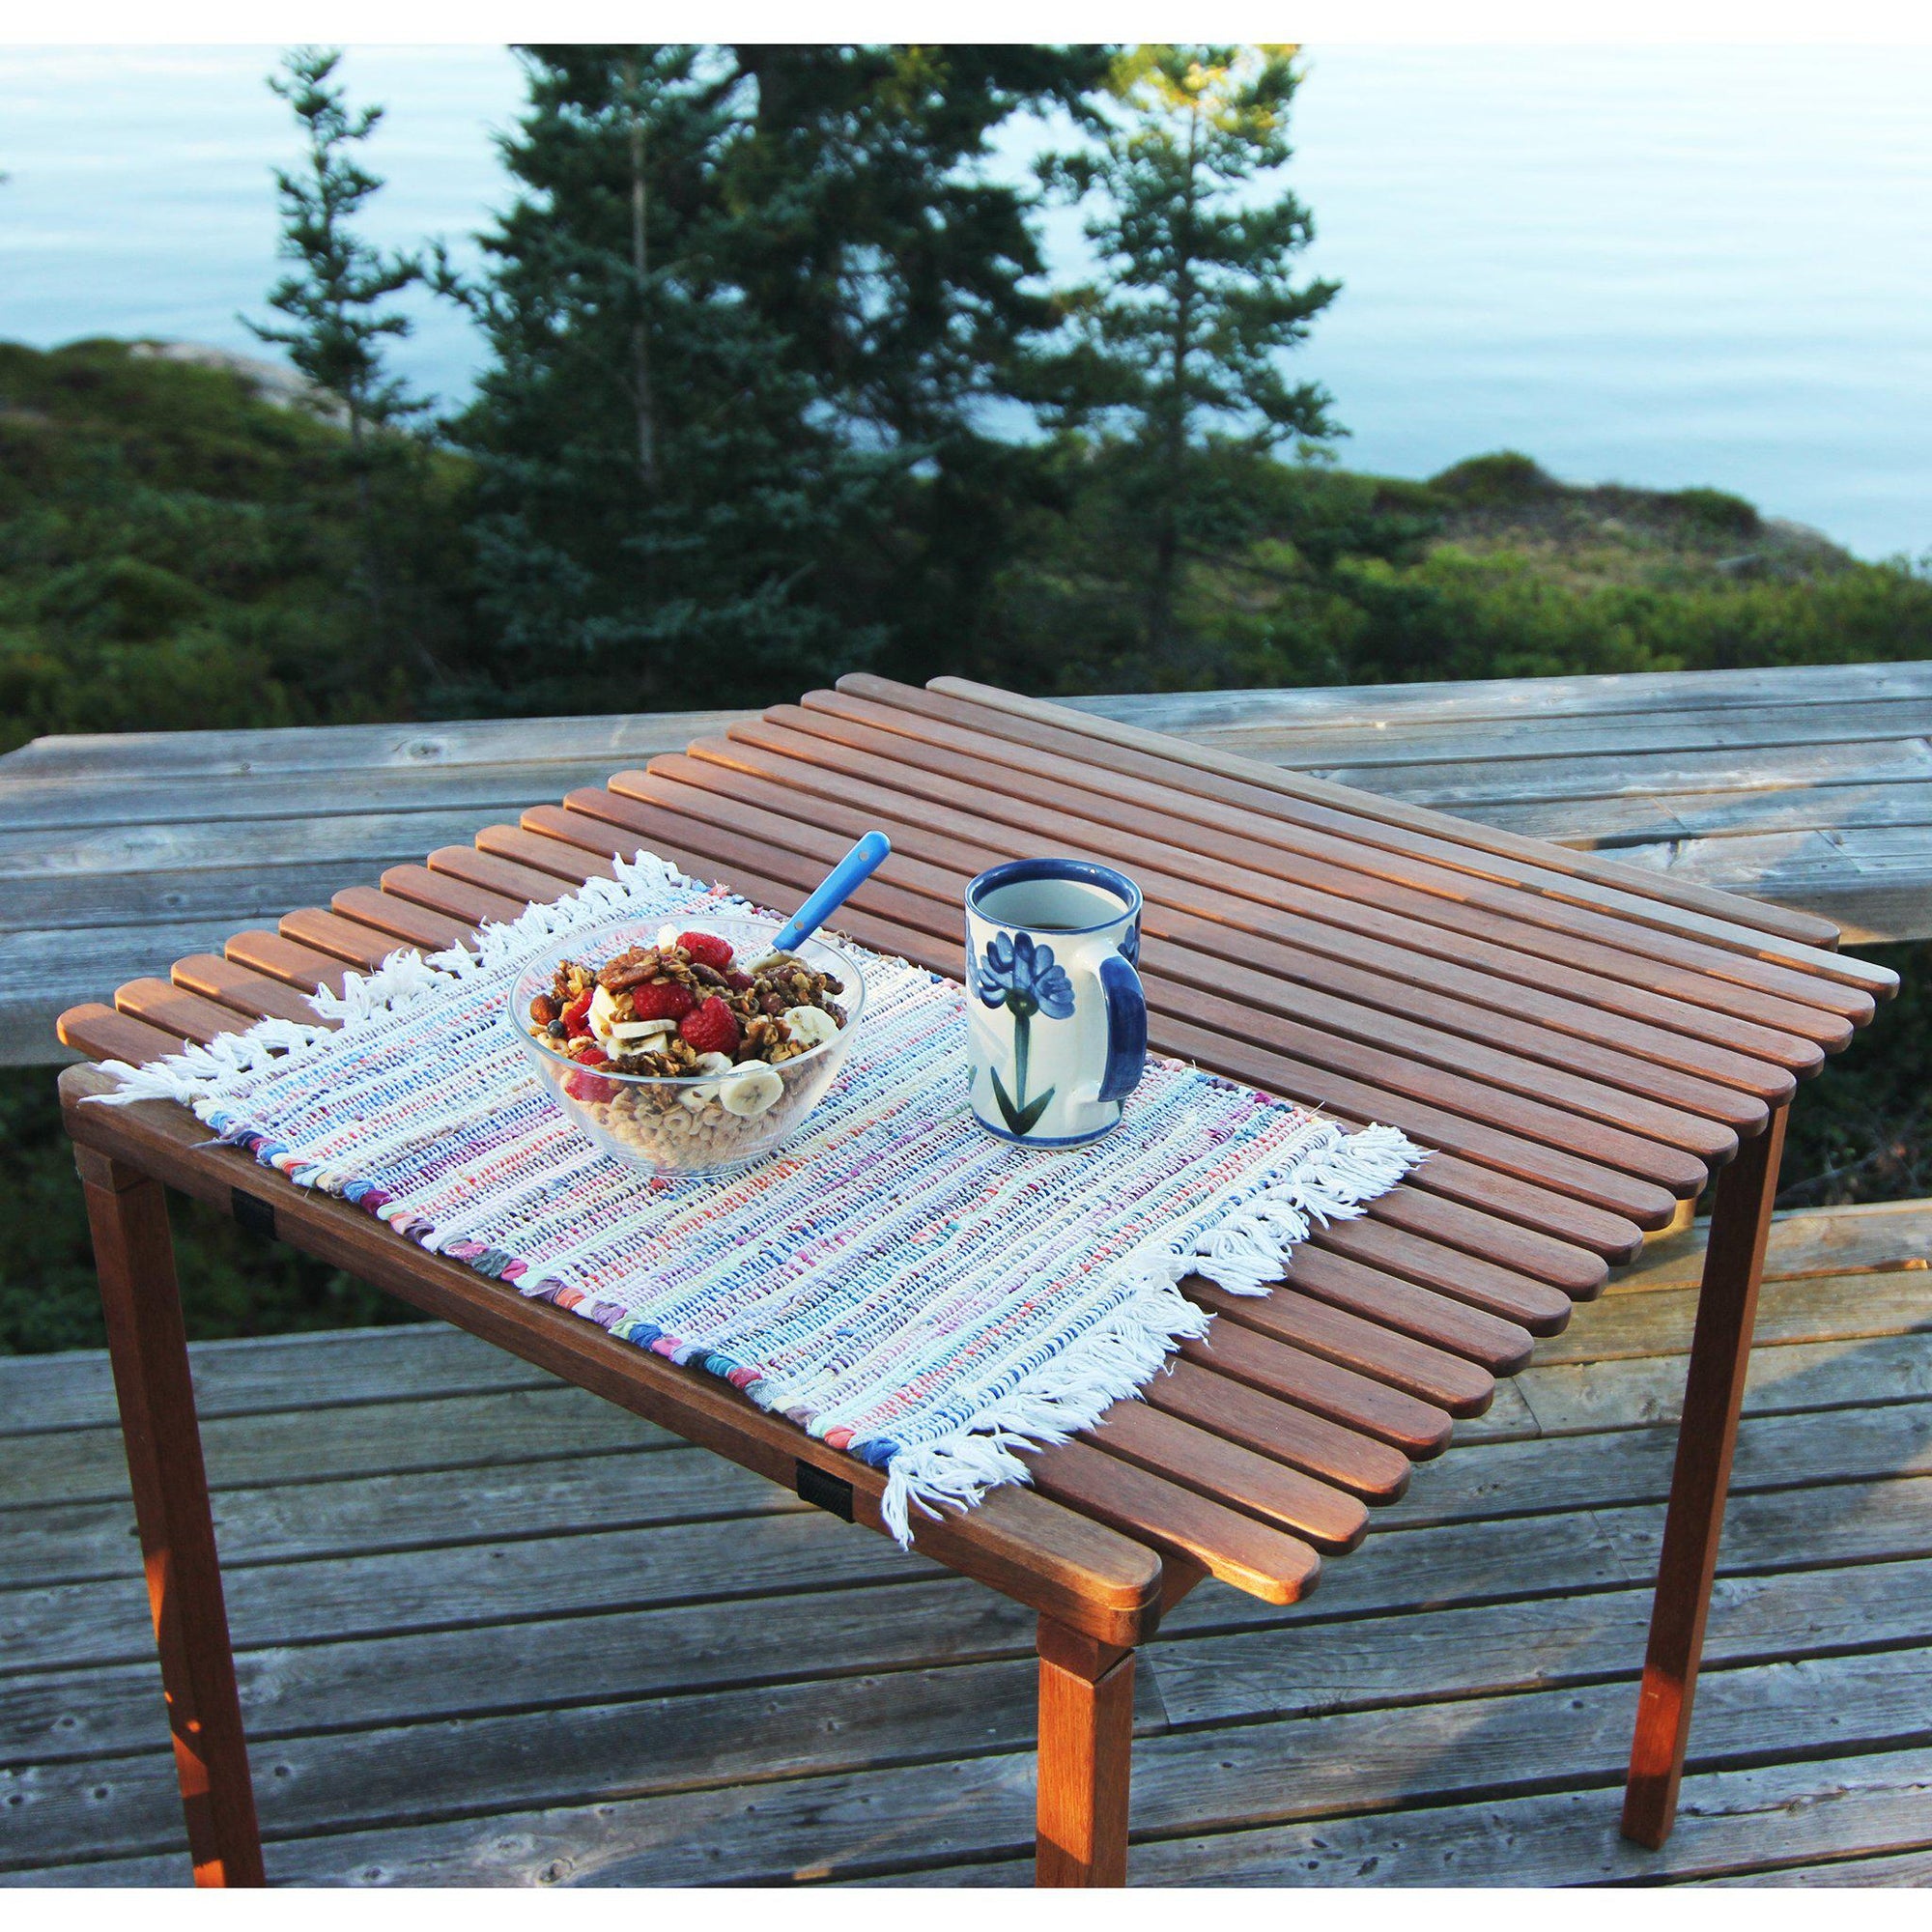 Nomad Table, from Byer of Maine